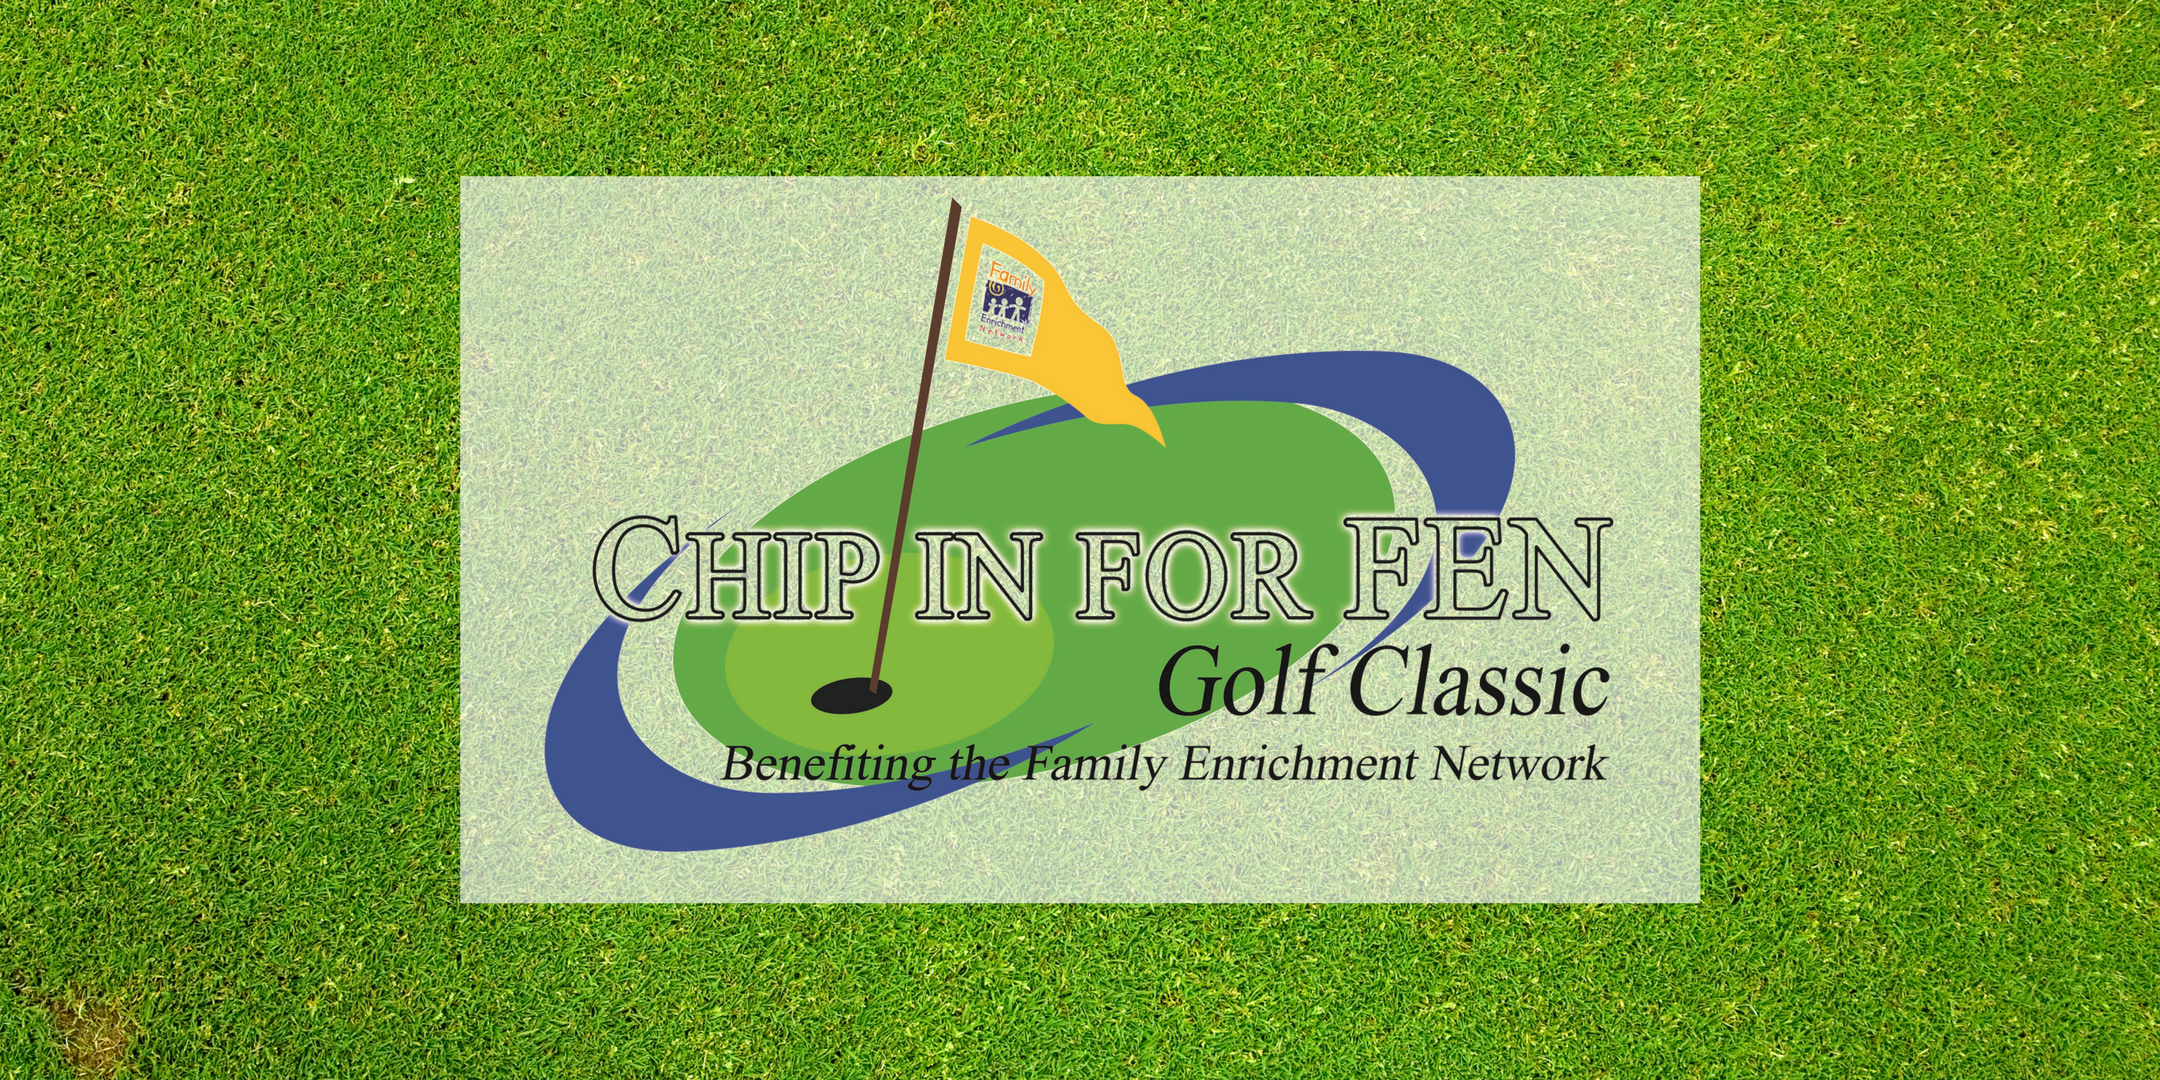 Chip in for FEN Golf Classic